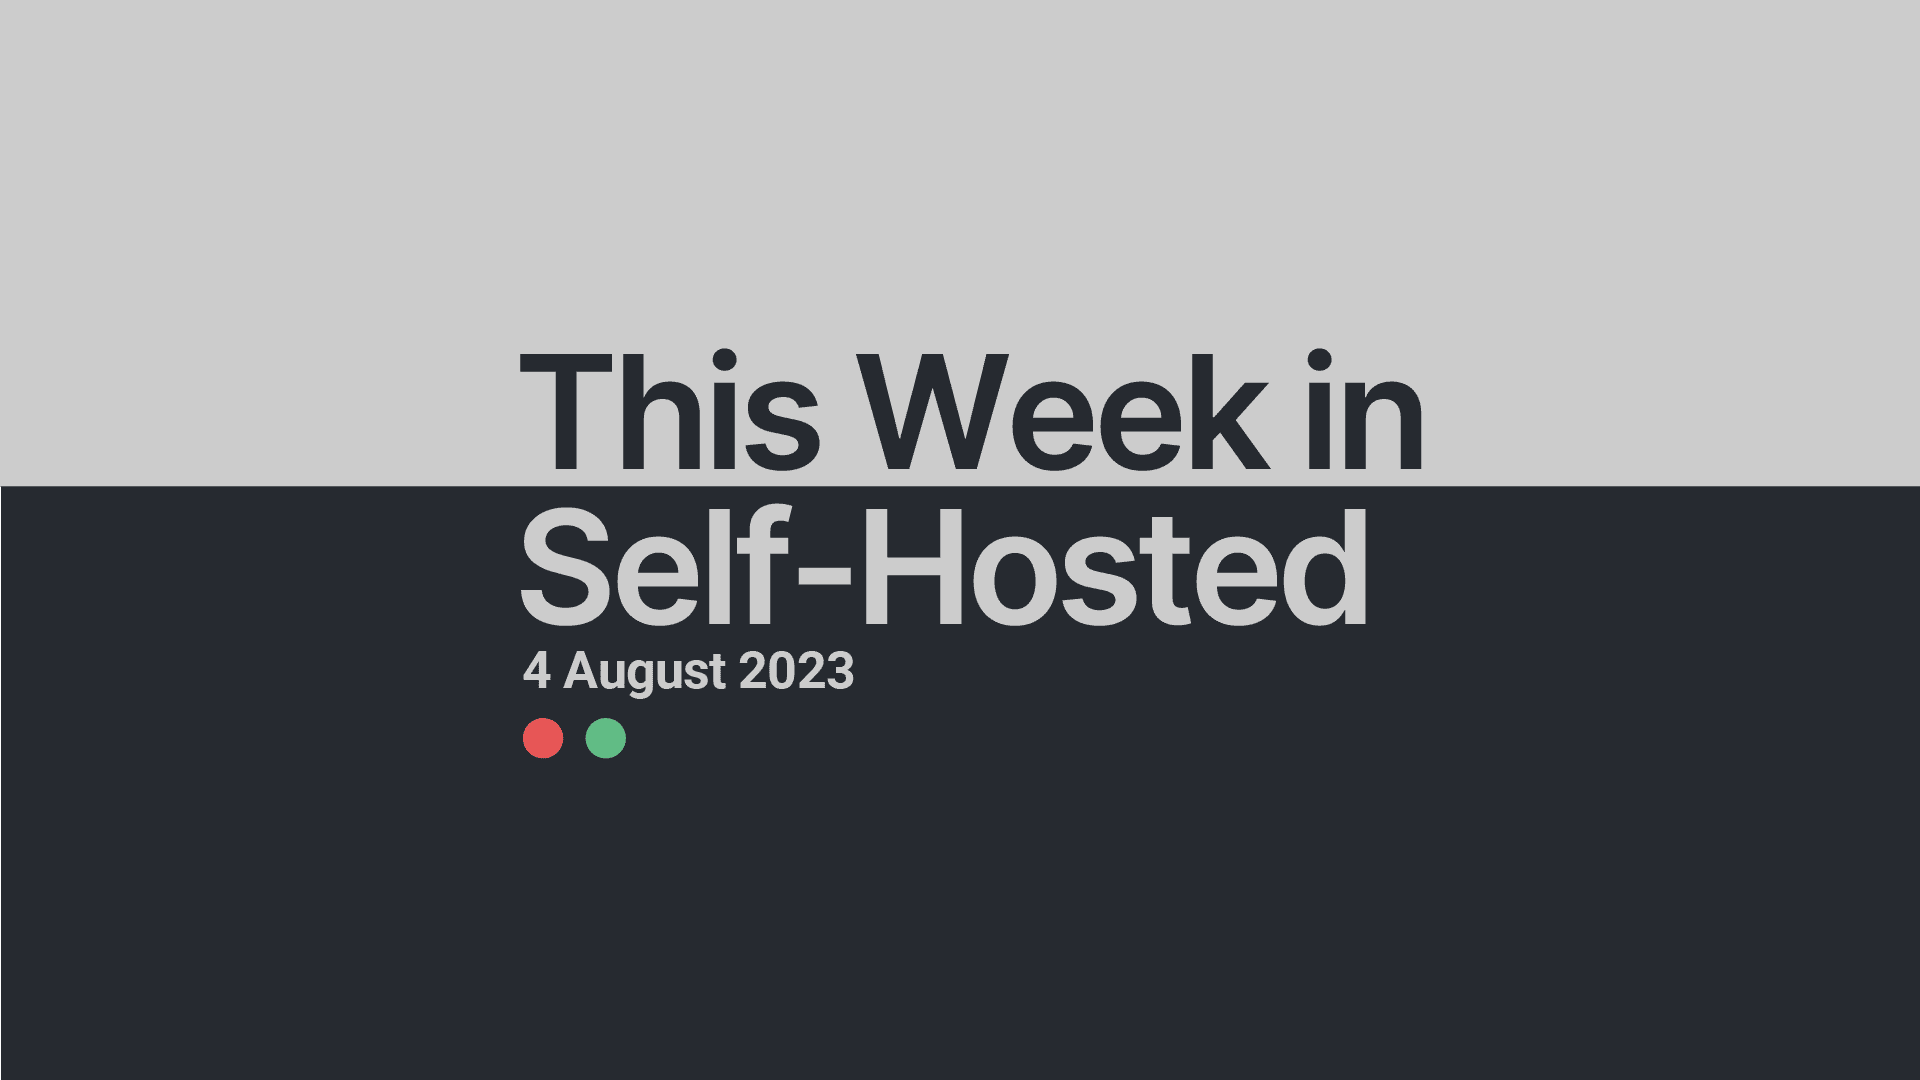 This Week in Self-Hosted (4 August 2023) Post image